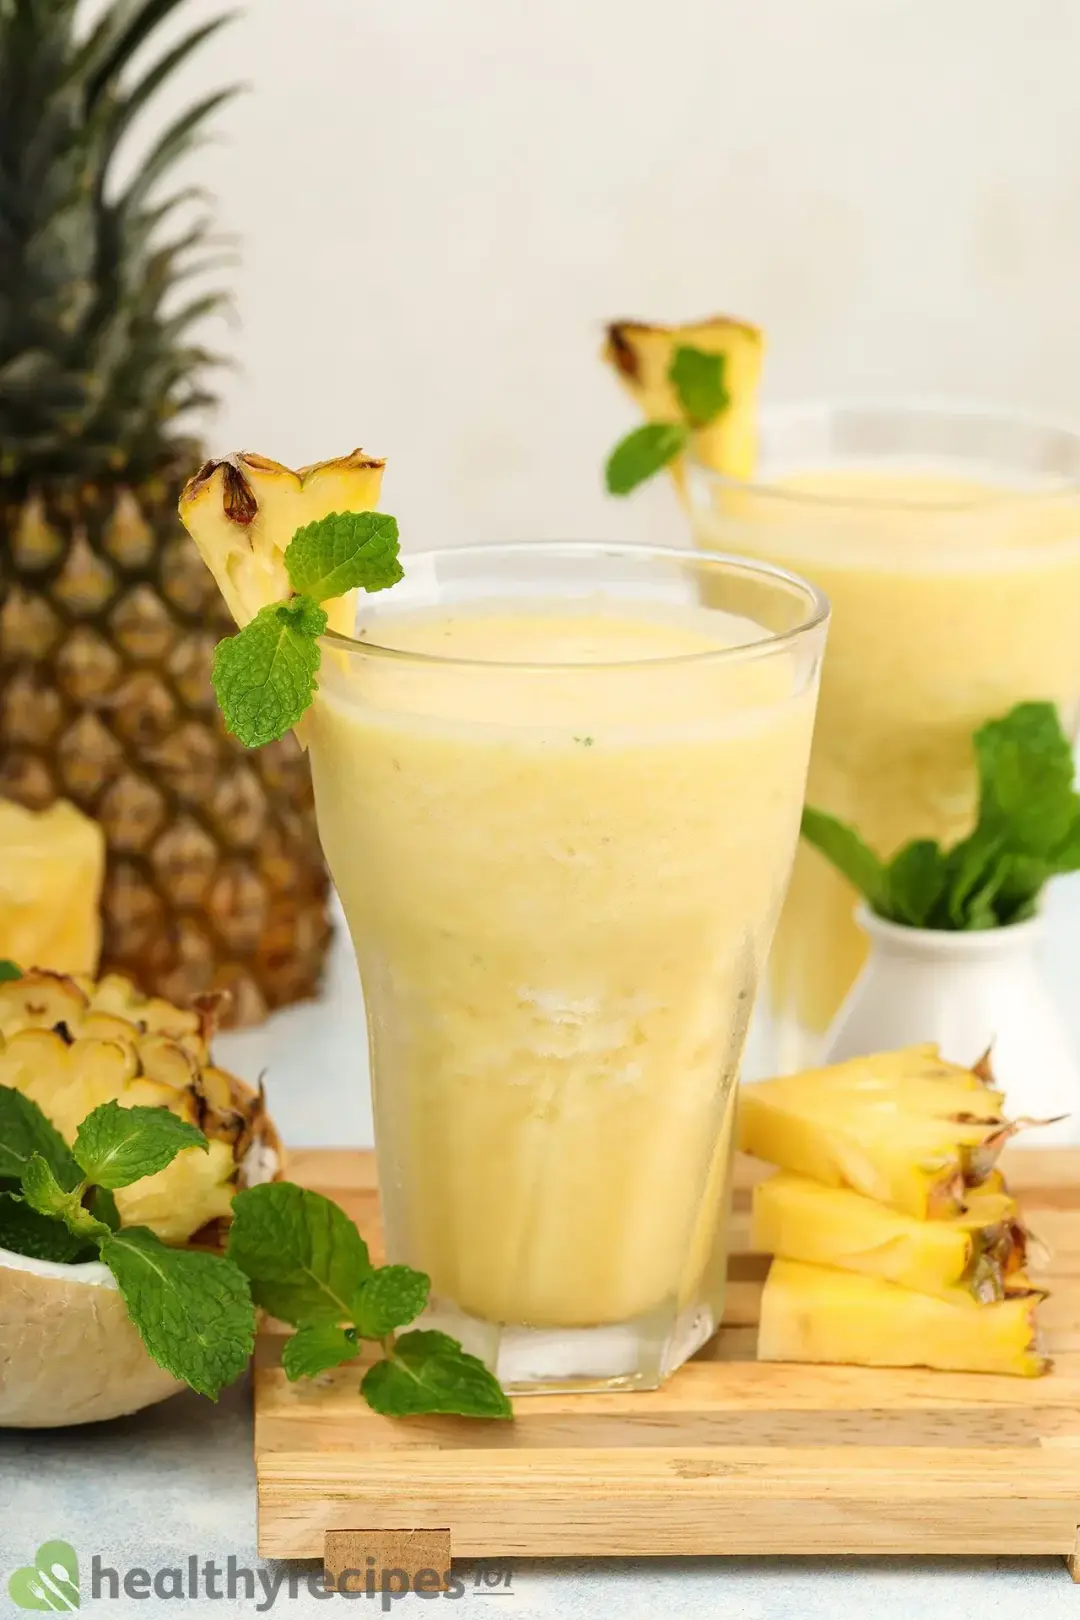 How Long Does Pineapple Coconut Smoothie Last